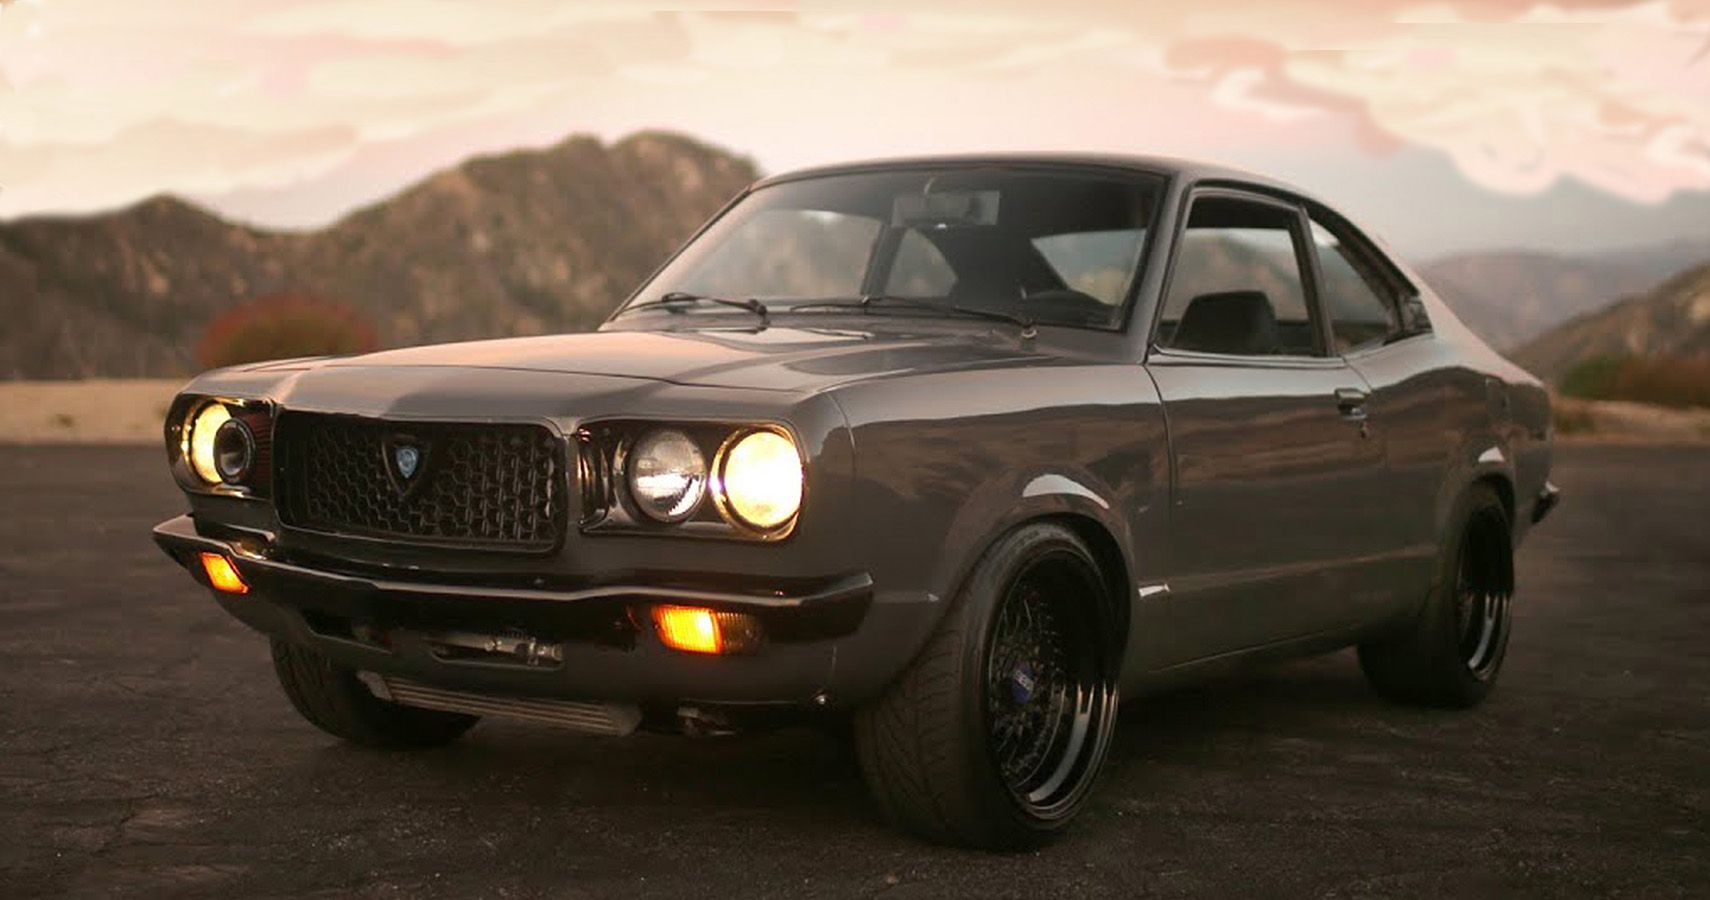 The Mazda RX-3 Savanna Was Sold In The Us From 1971 To 1978 As A Rotary-Engined Wonder